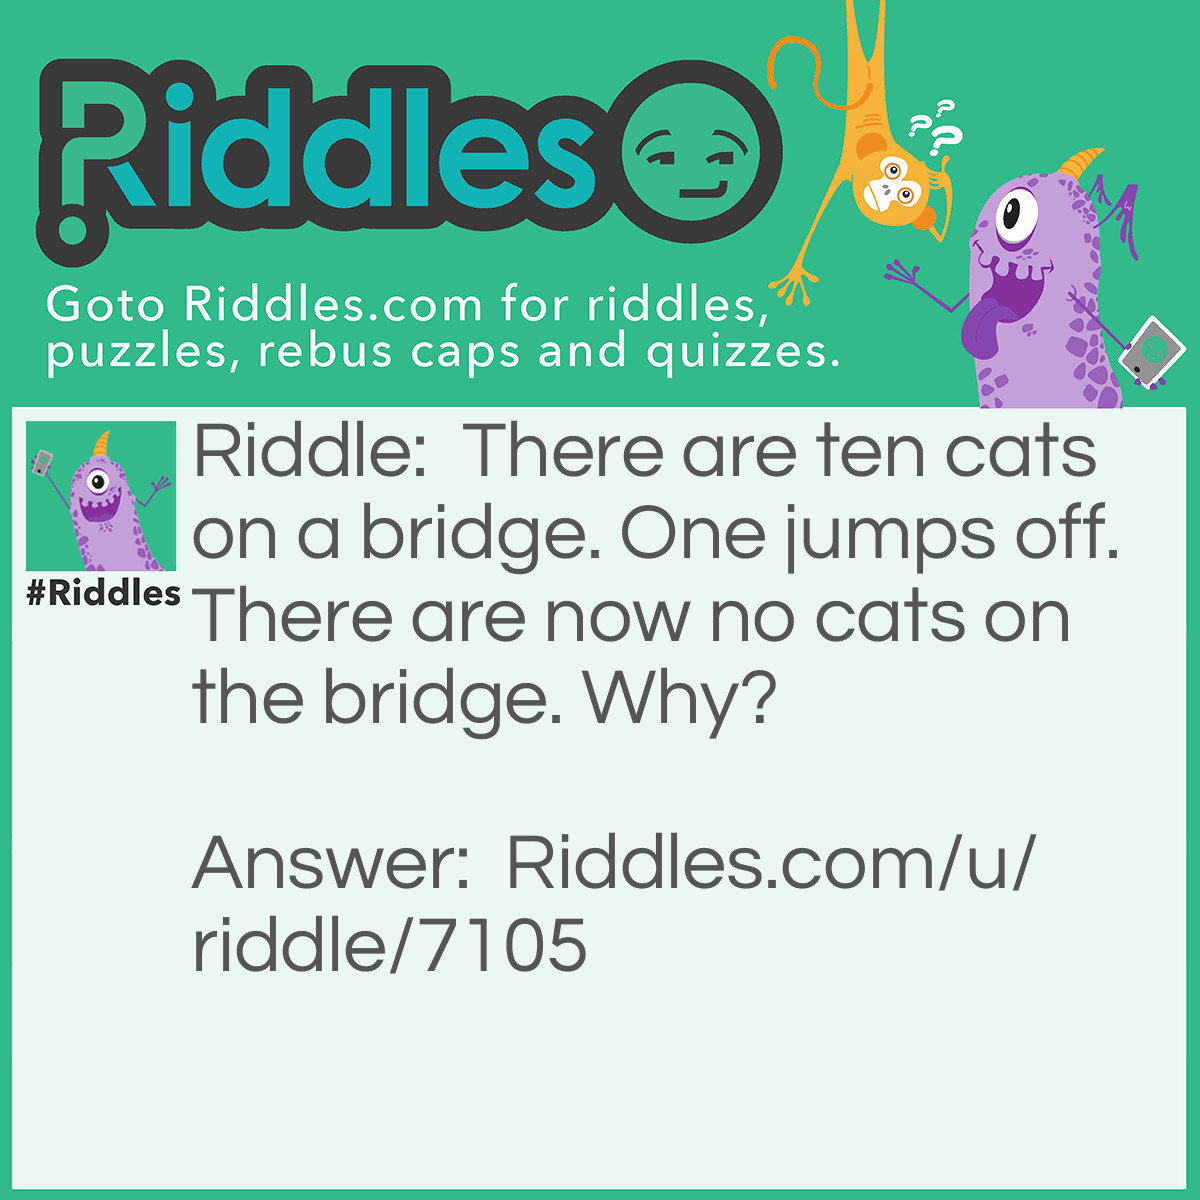 Riddle: There are ten cats on a bridge. One jumps off. There are now no cats on the bridge. Why? Answer: They’re copycats!